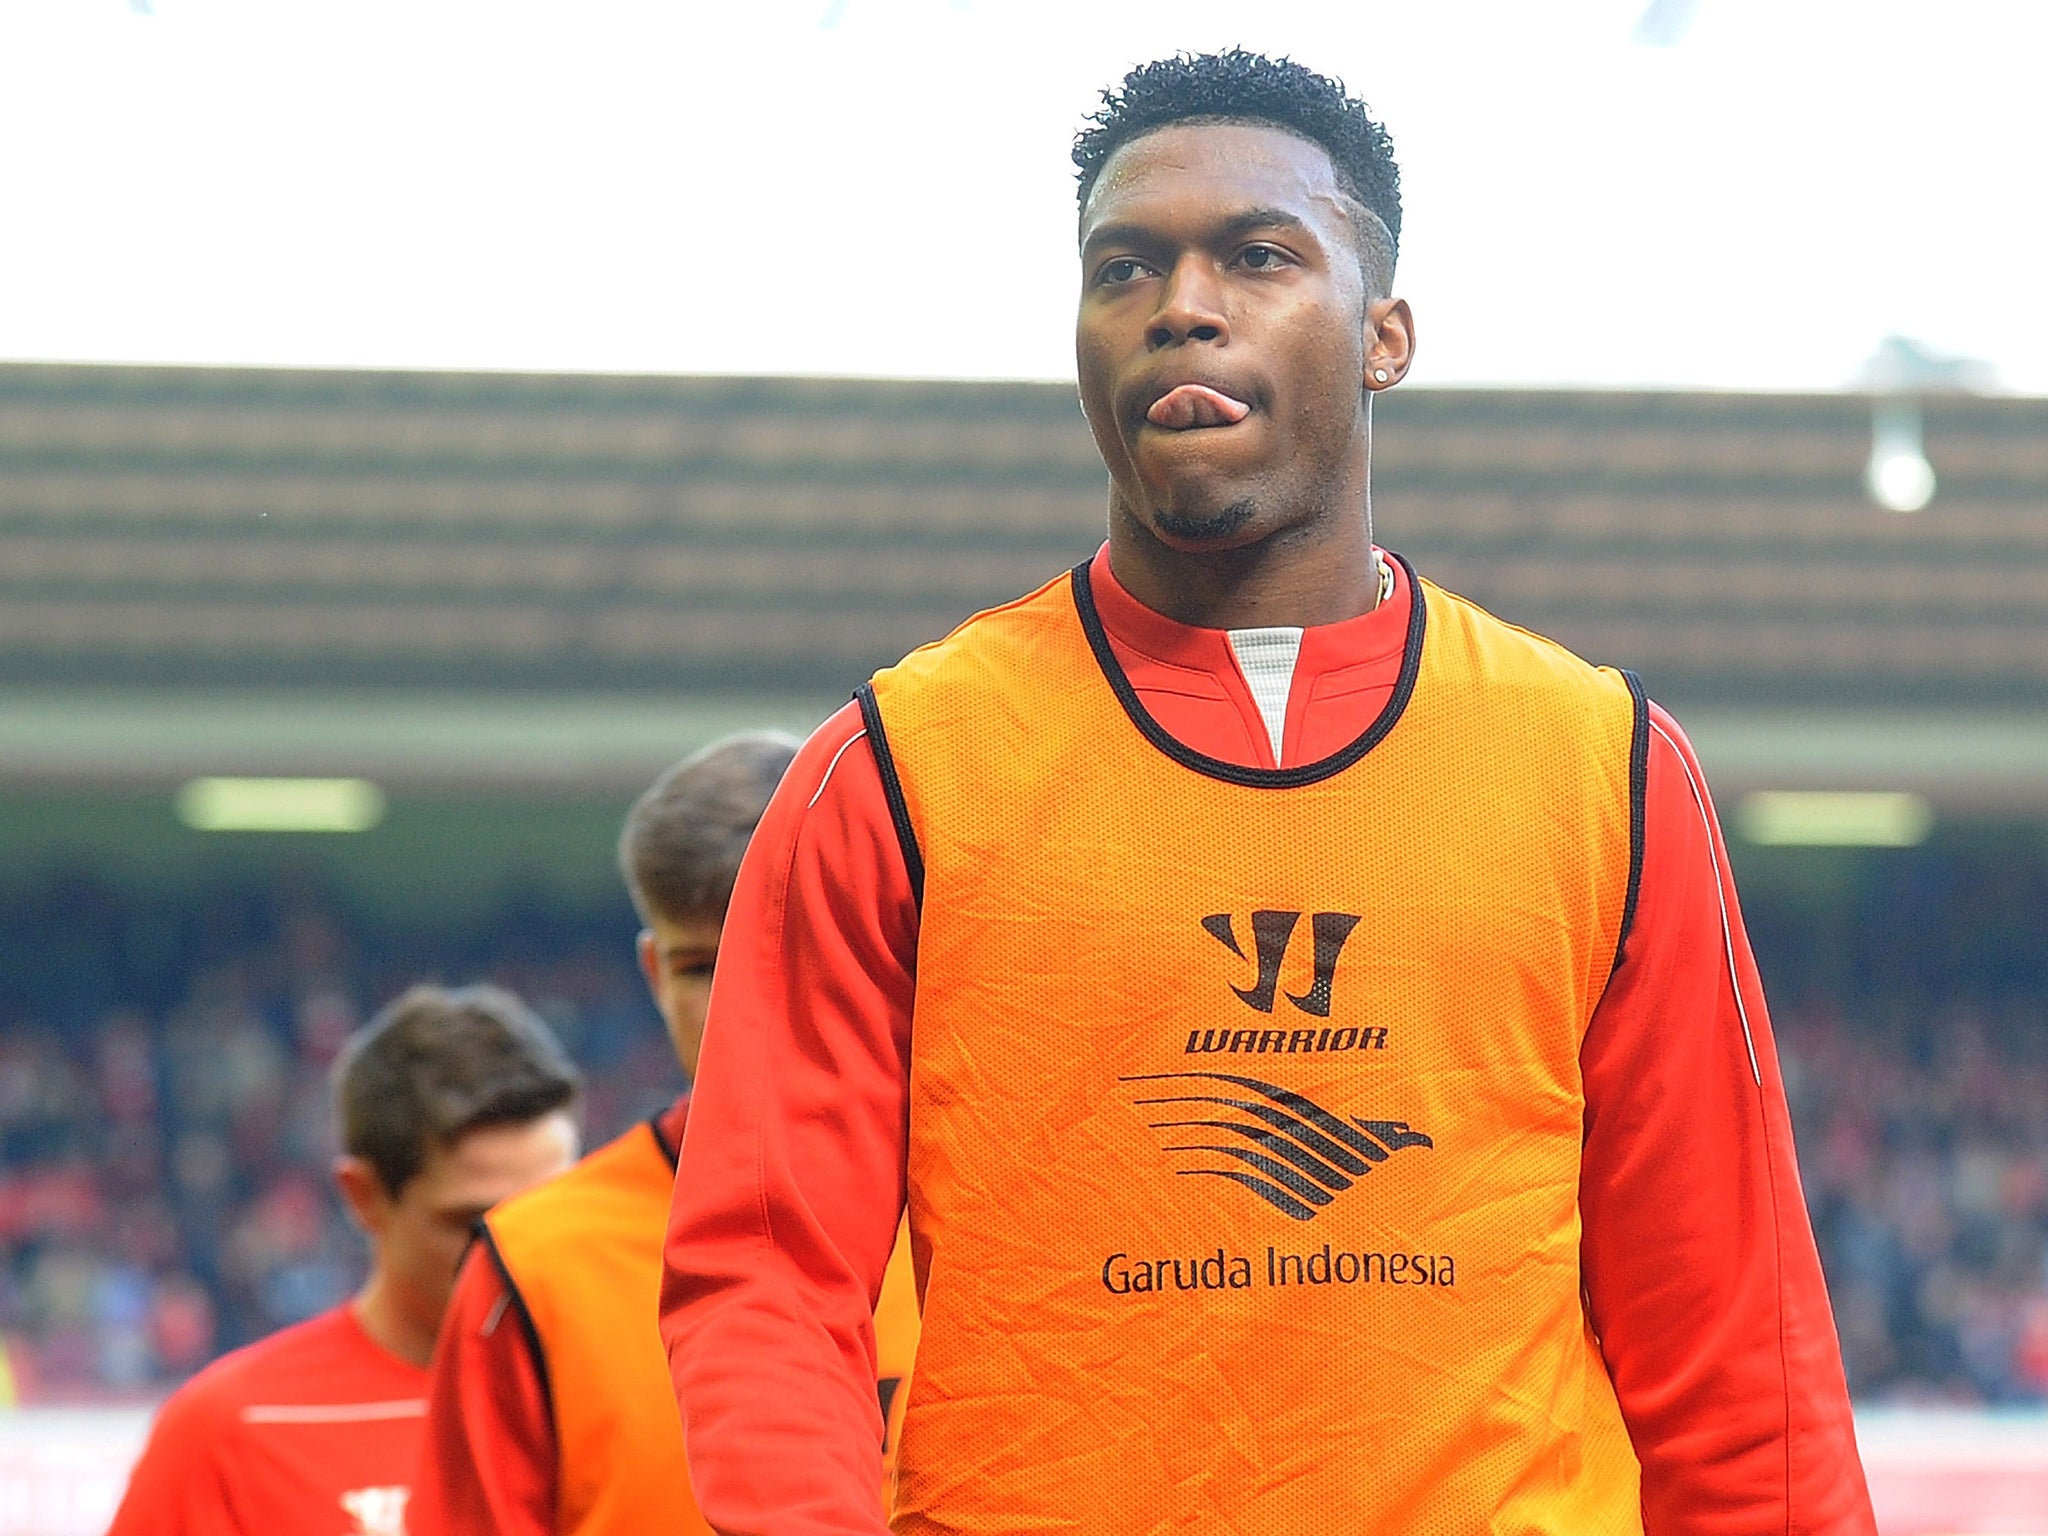 Daniel Sturridge is out injured for Liverpool